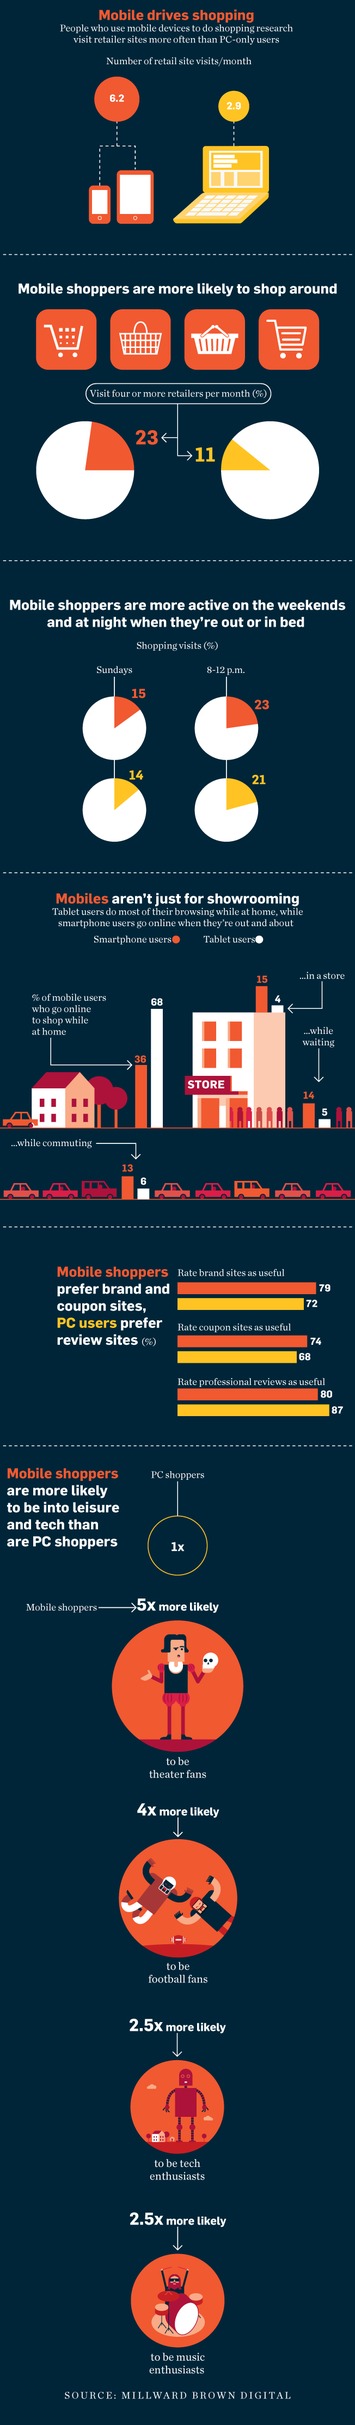 People Shopping on Mobile Devices Visit More Sites Than Those on a PC | Consumption Junction | Scoop.it